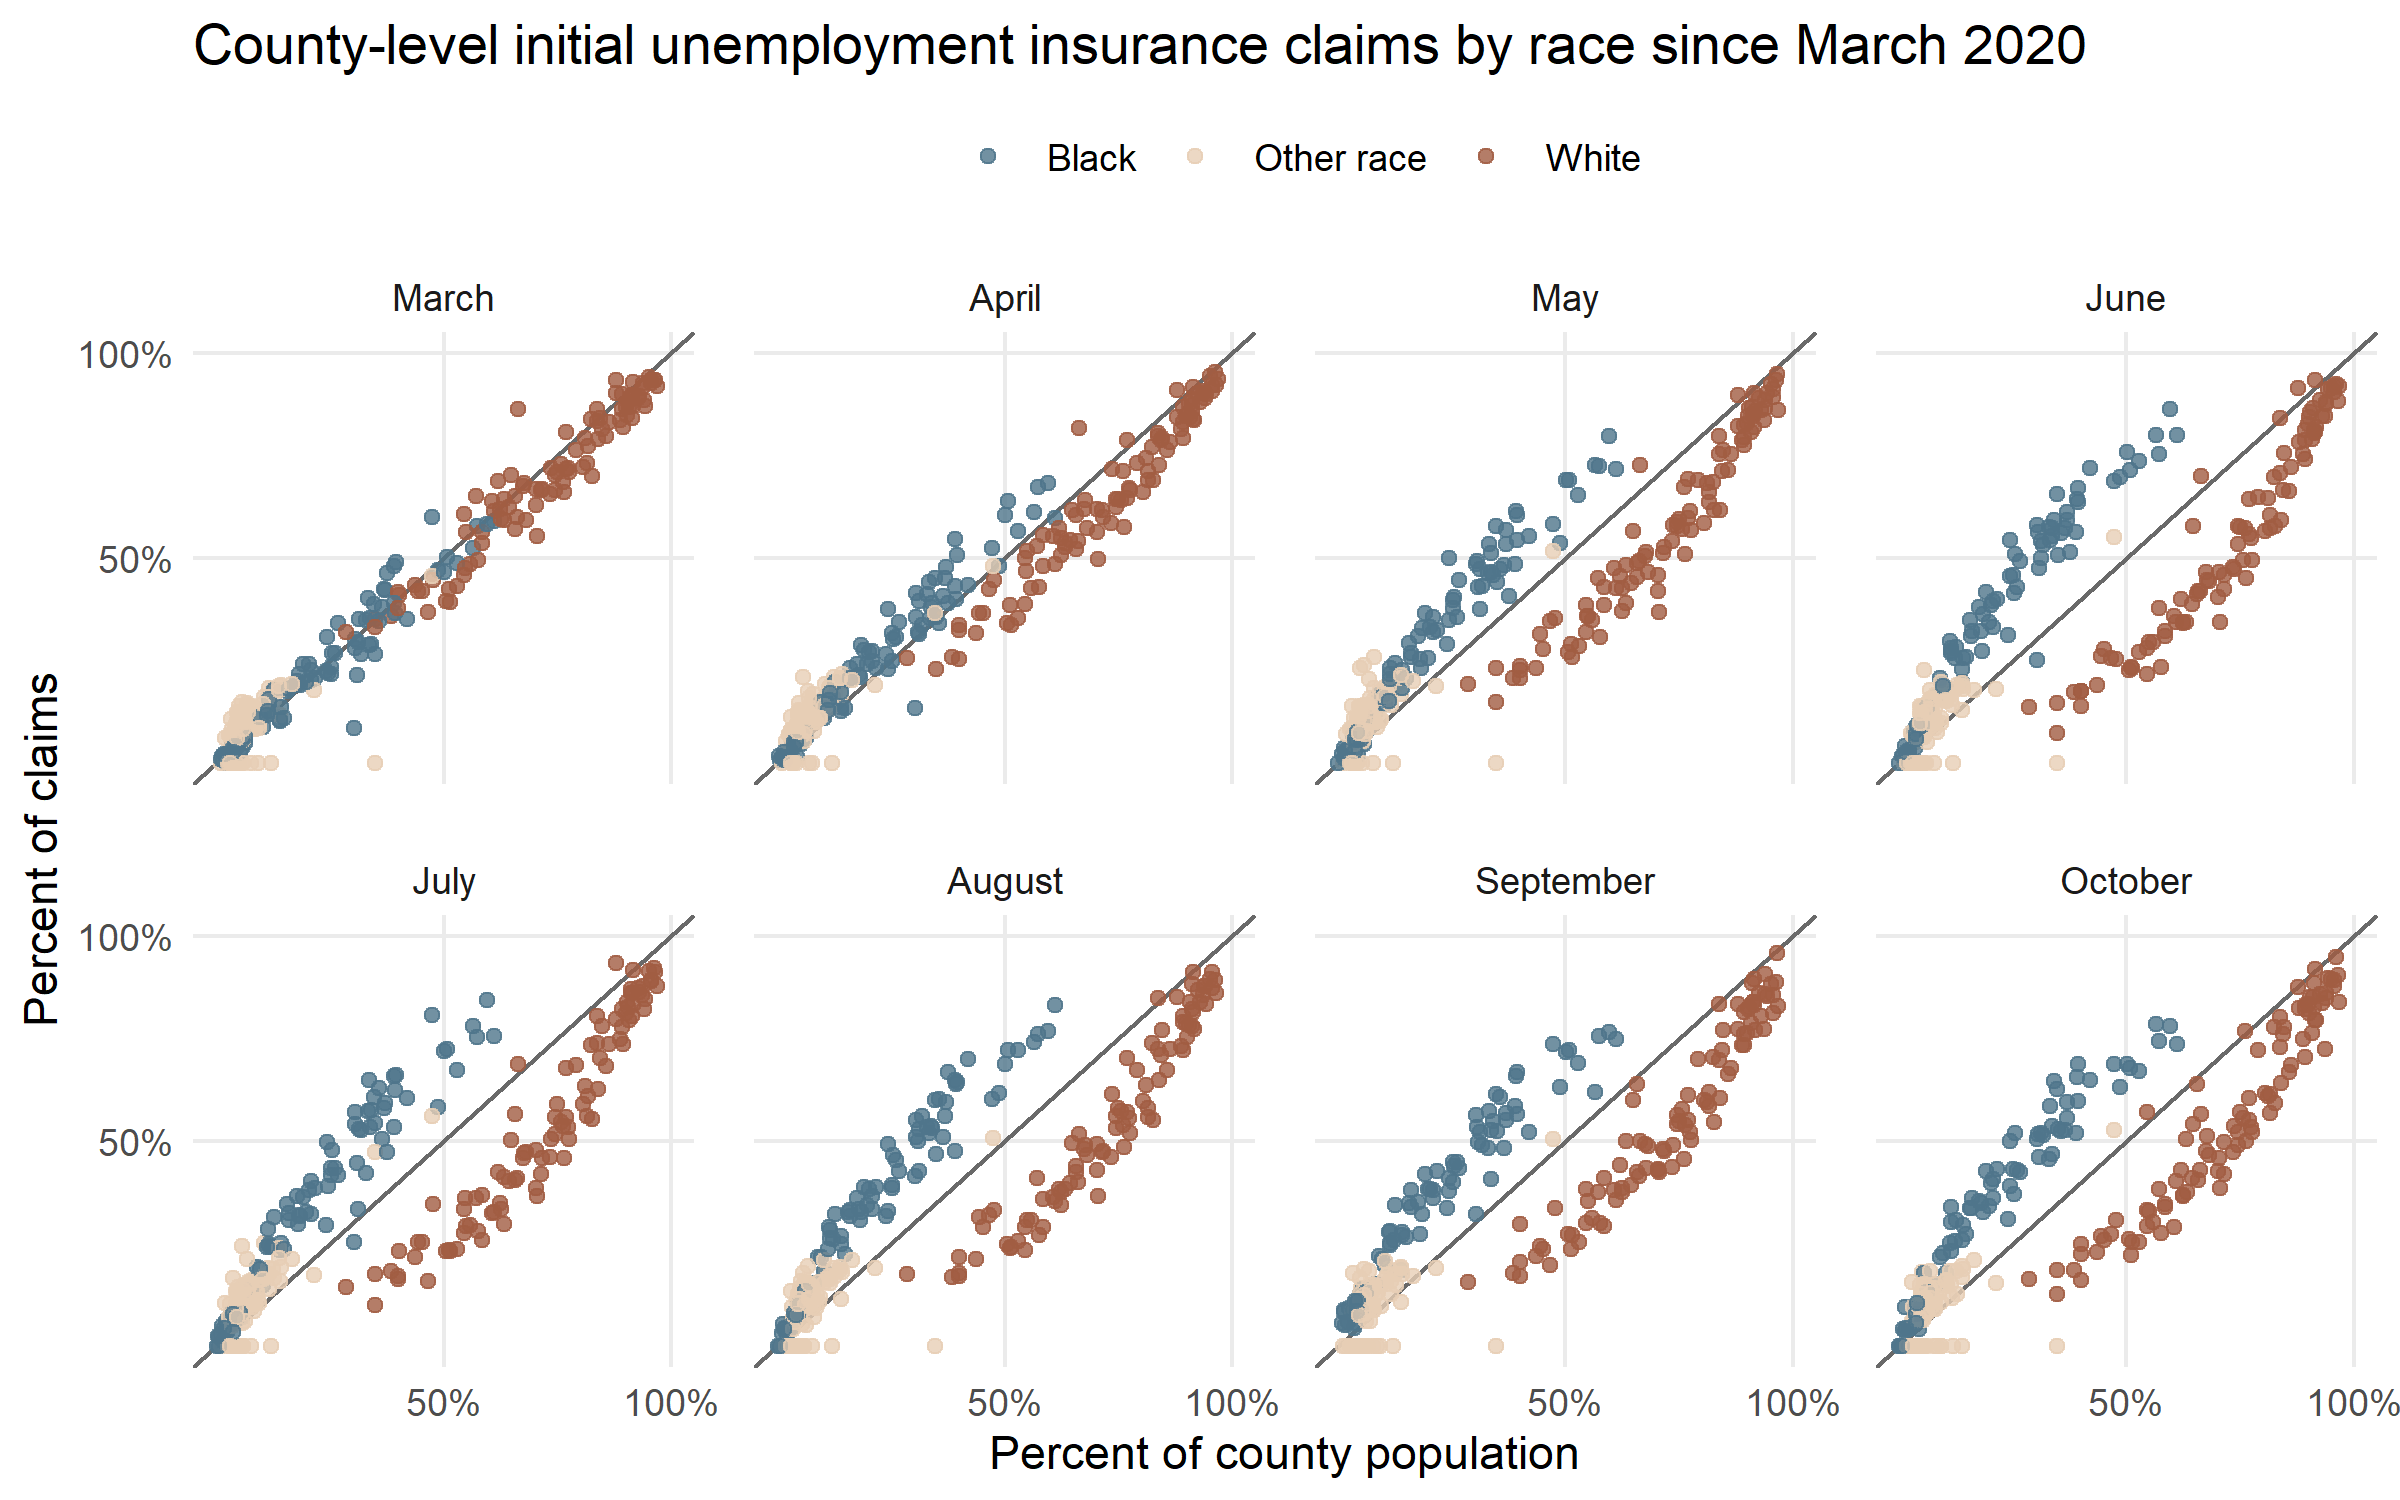 Figure 2: Distribution of Initial Unemployment Insurance Claims by Race Since March 2020. This image is a series of eight charts, representing the months of March through October 2020. It plots initial unemployment insurance claimants by race, with the categories of white, Black and other race. On each of the charts, there are clusters of blue, brown and yellow dots representing county-lev Black, white, and other race unemployment insurance claimants, respectively. Each chart has an x-axis that represents the racial category's share of the total county population, and a y-axis that represents the racial category's total share of claimants in that county. A diagonal line with a 1:1 slope indicates where counties with proportional claims to population would fall 